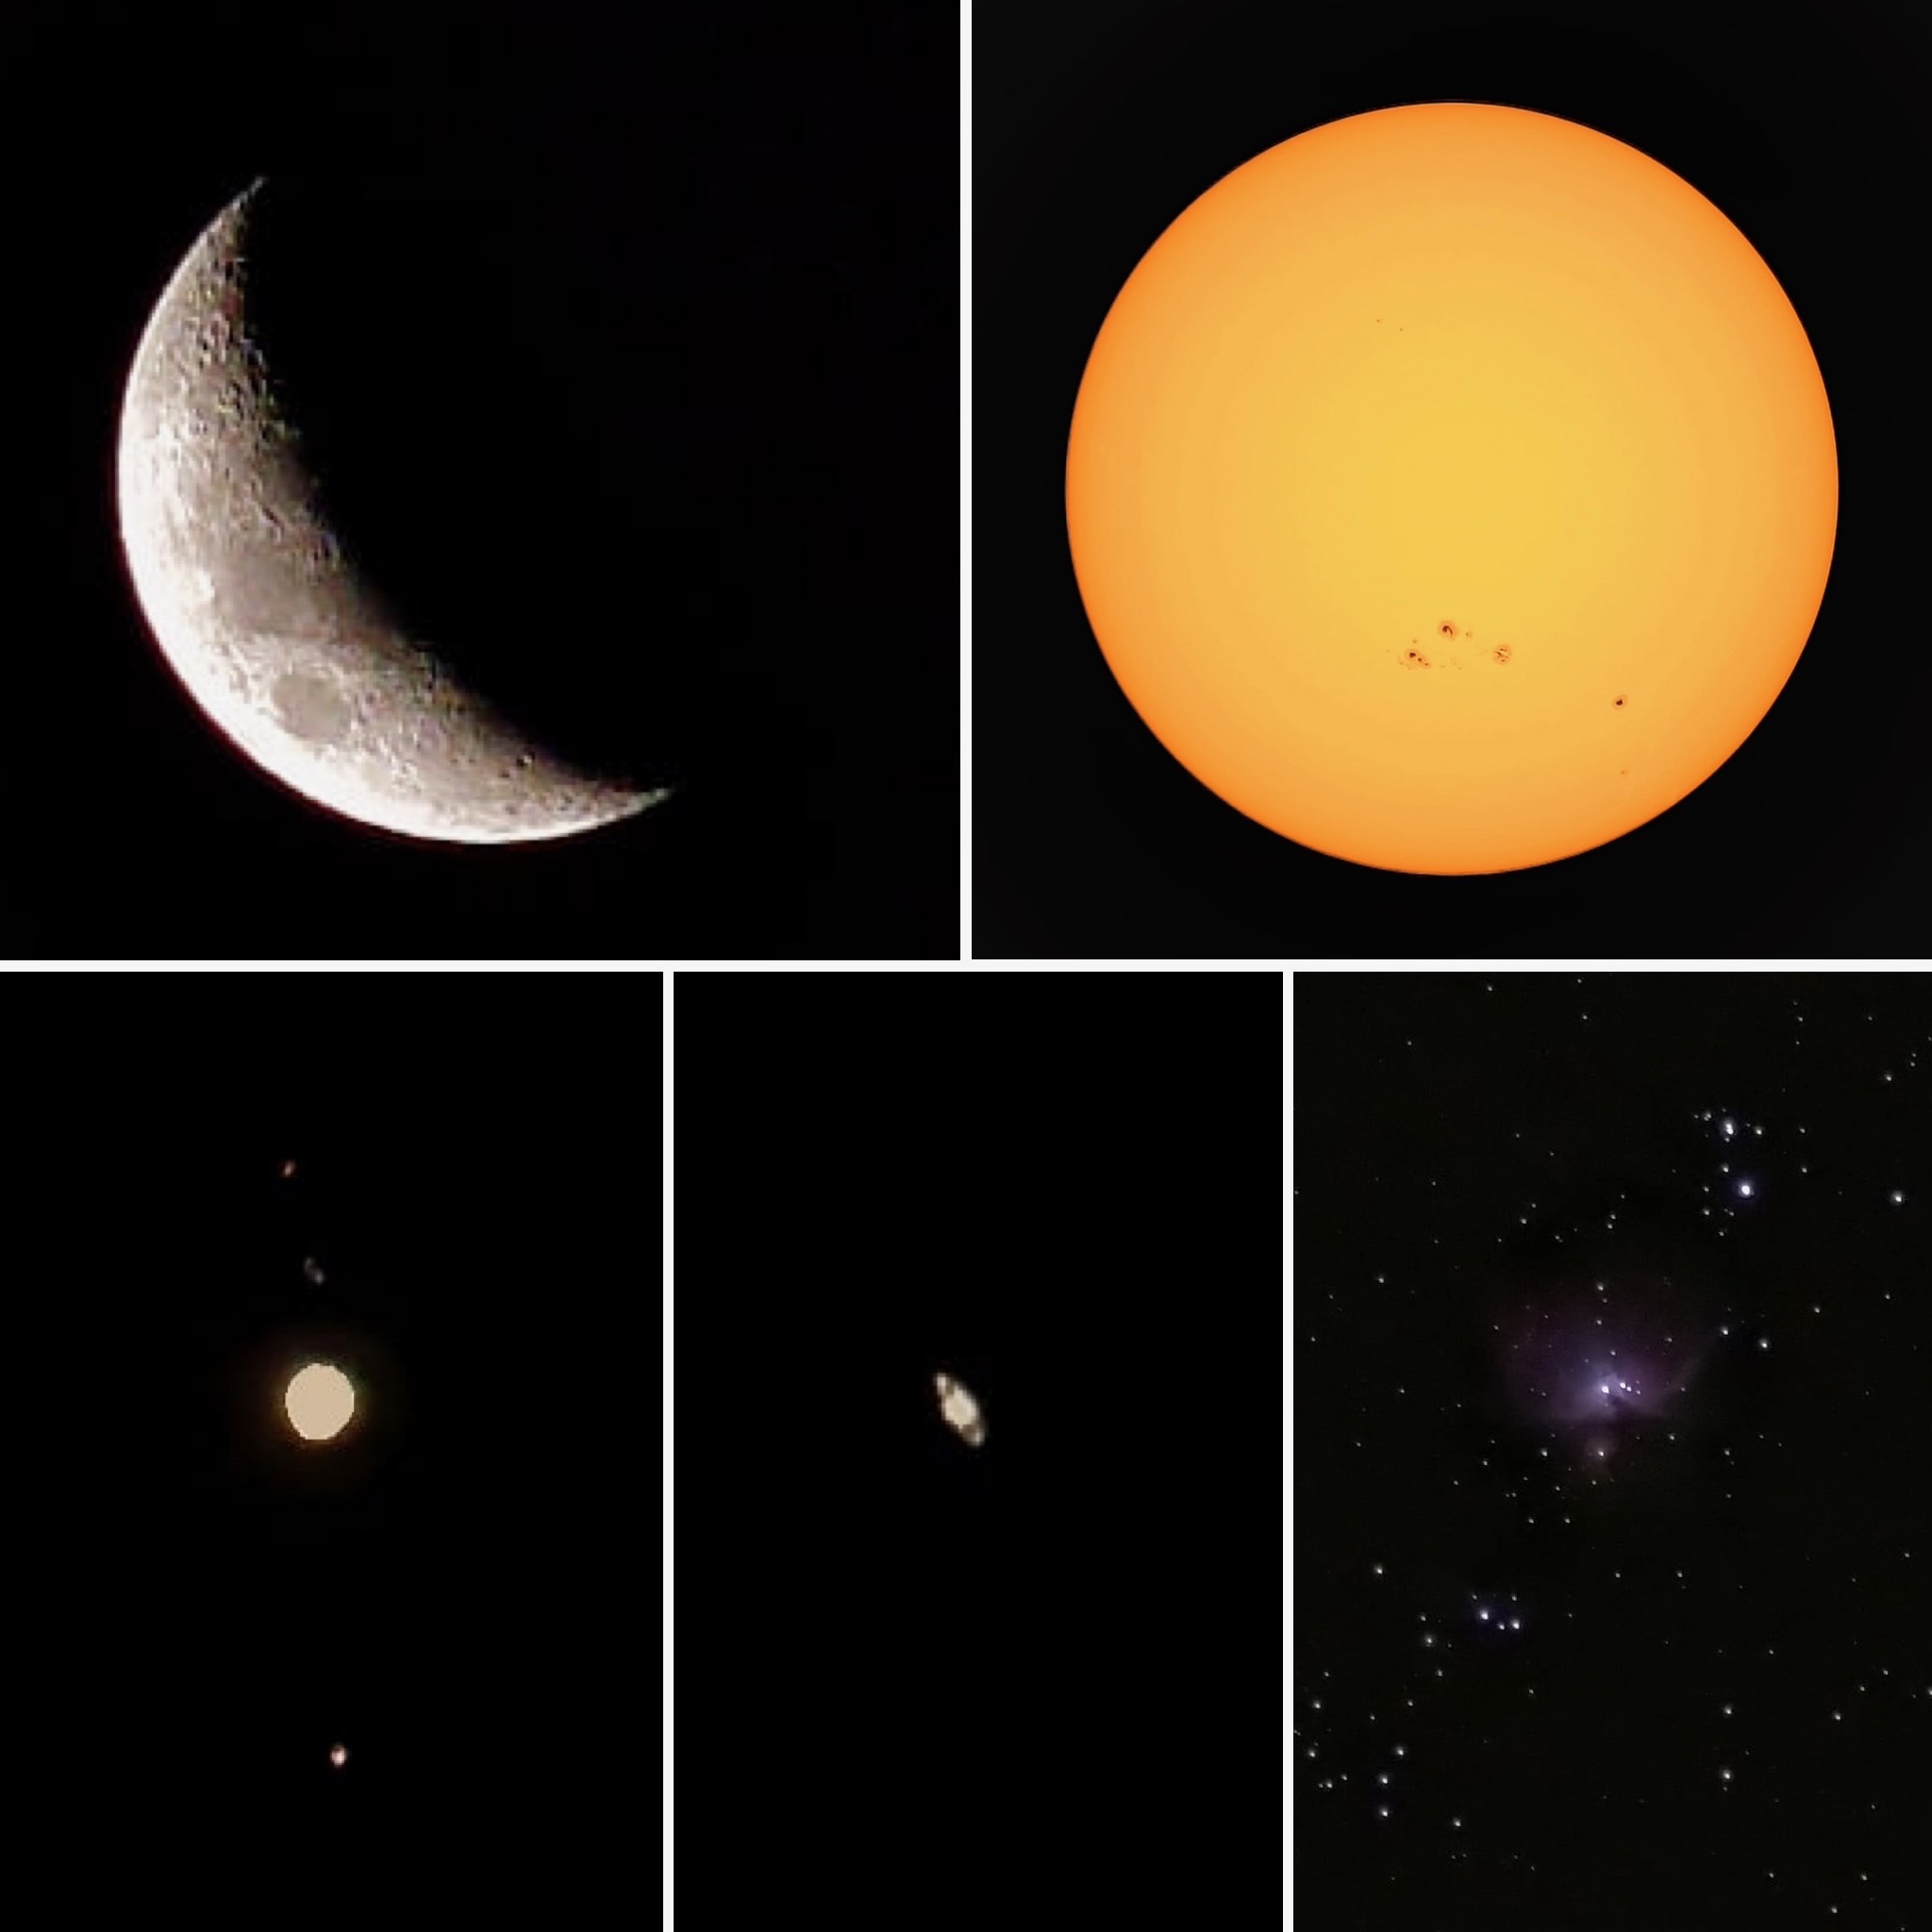 My first astro shots